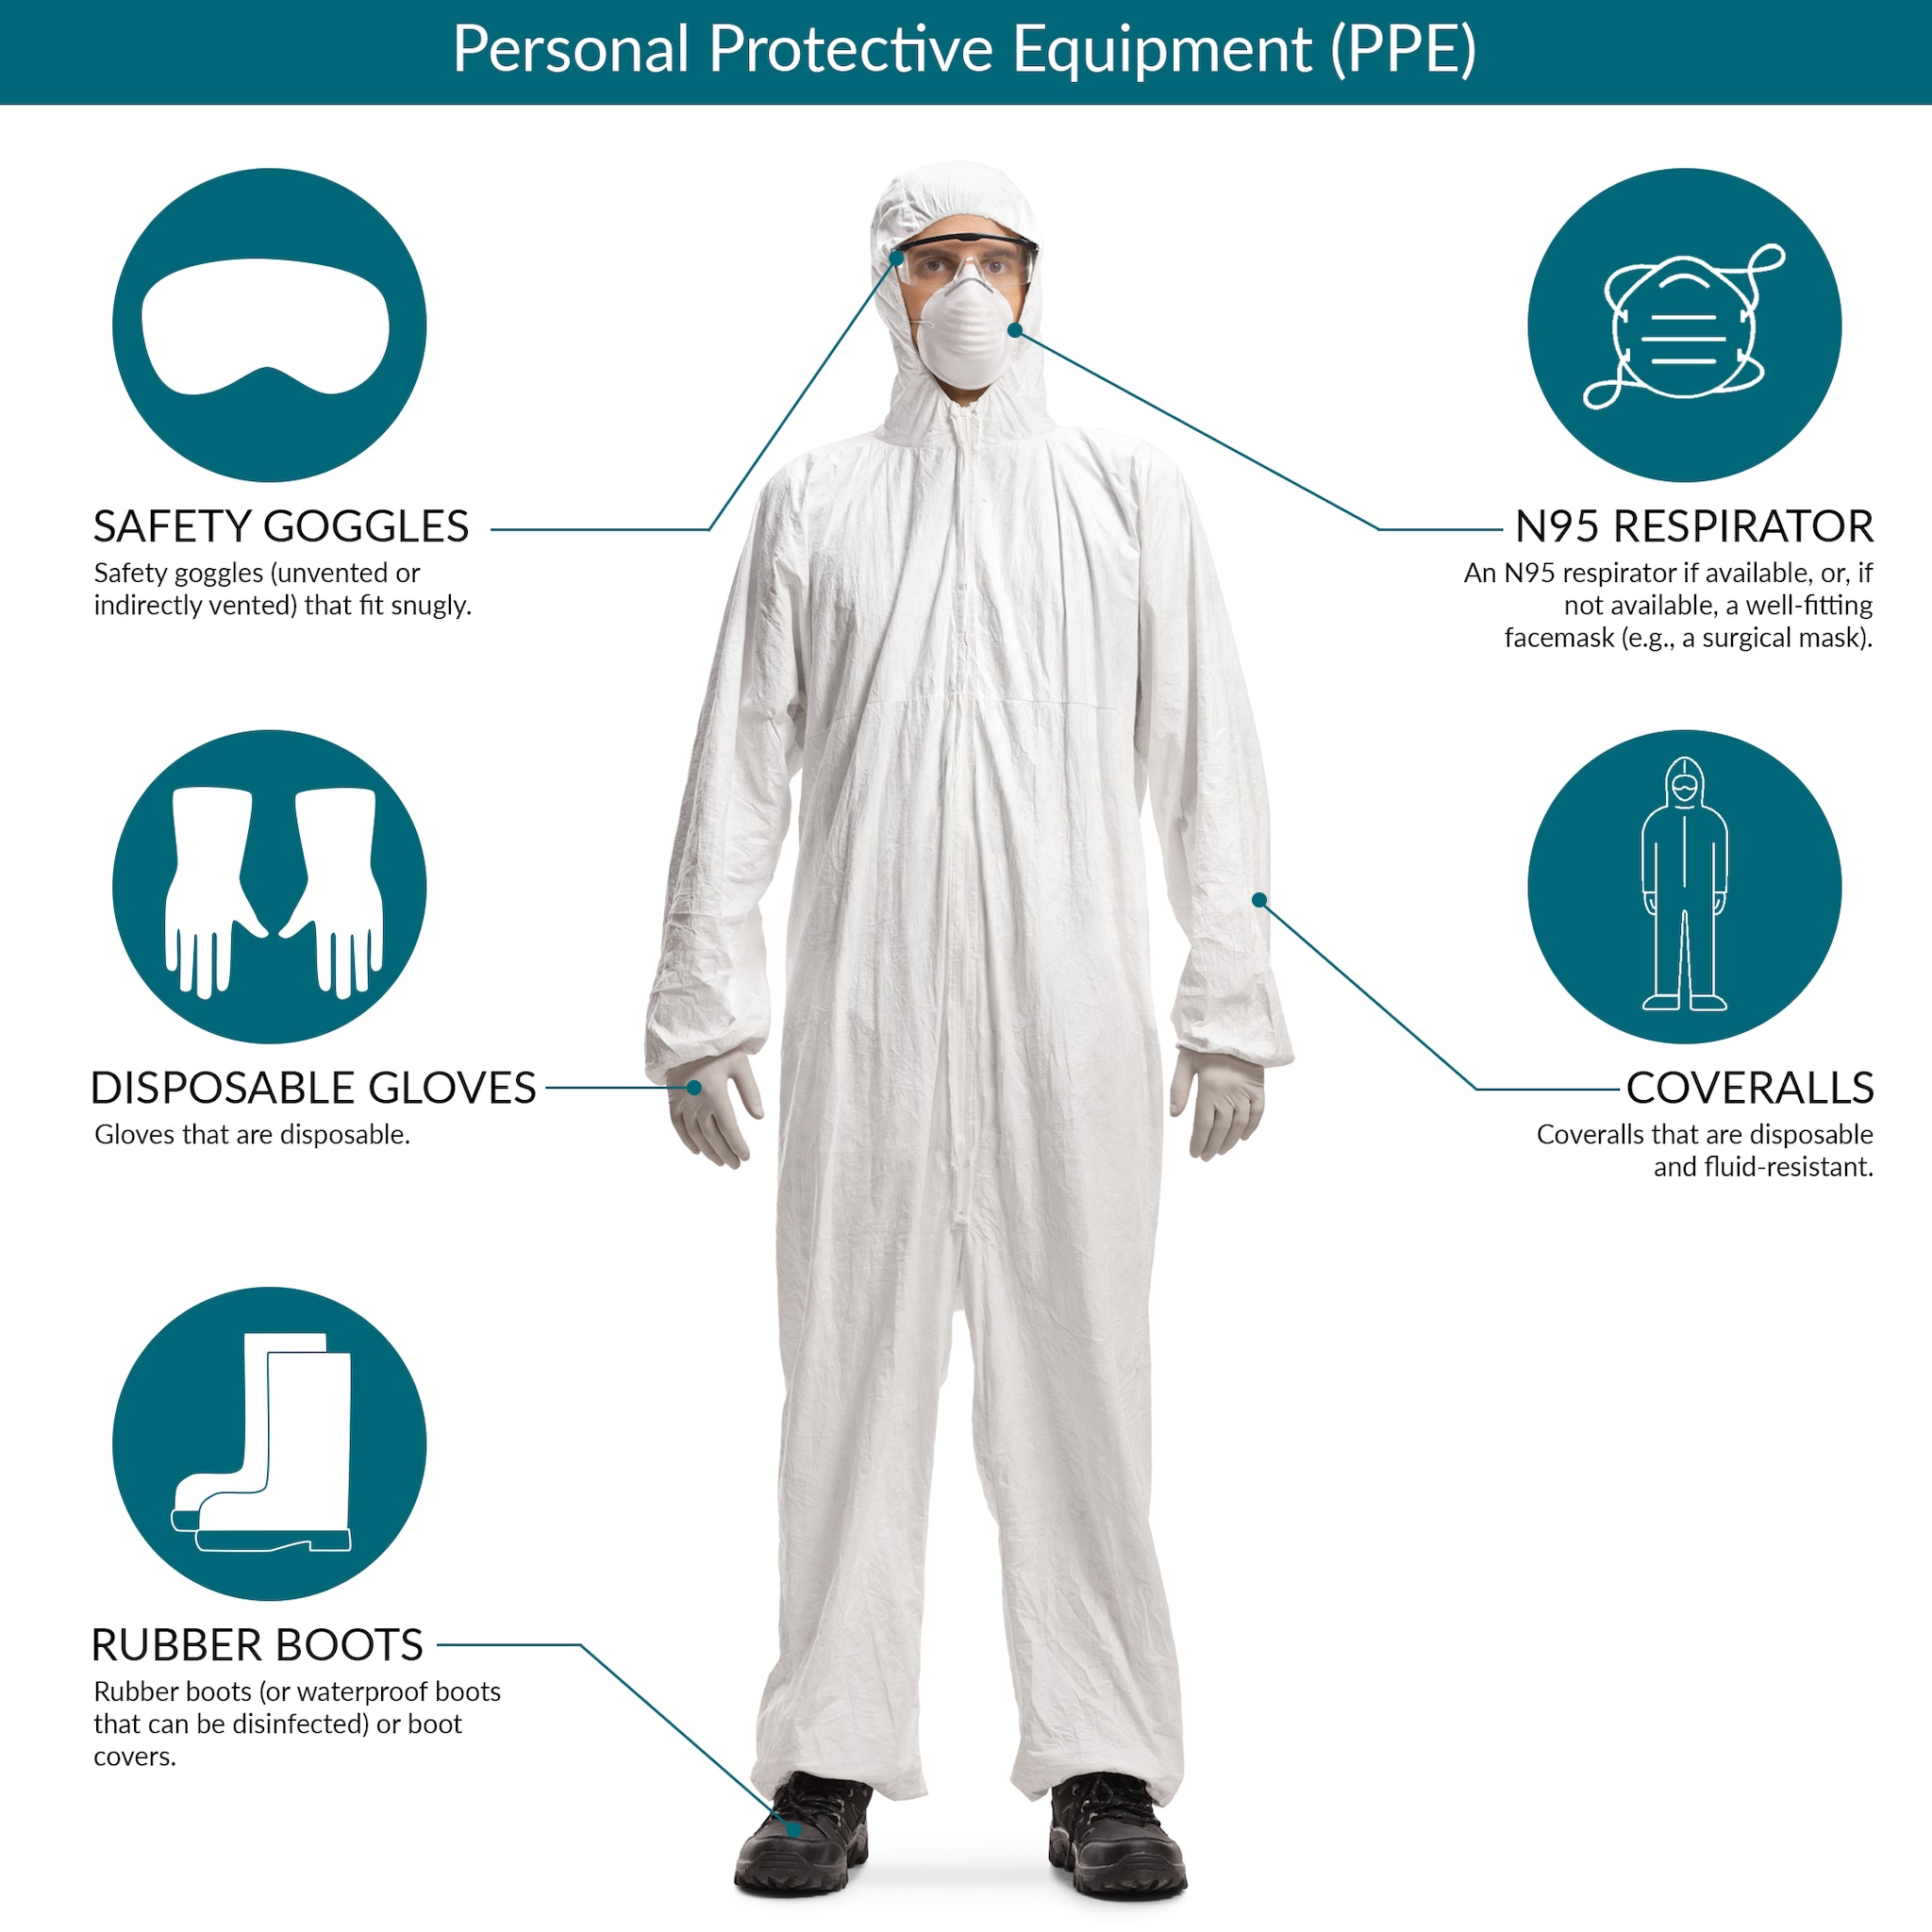 Information about recommended PPE